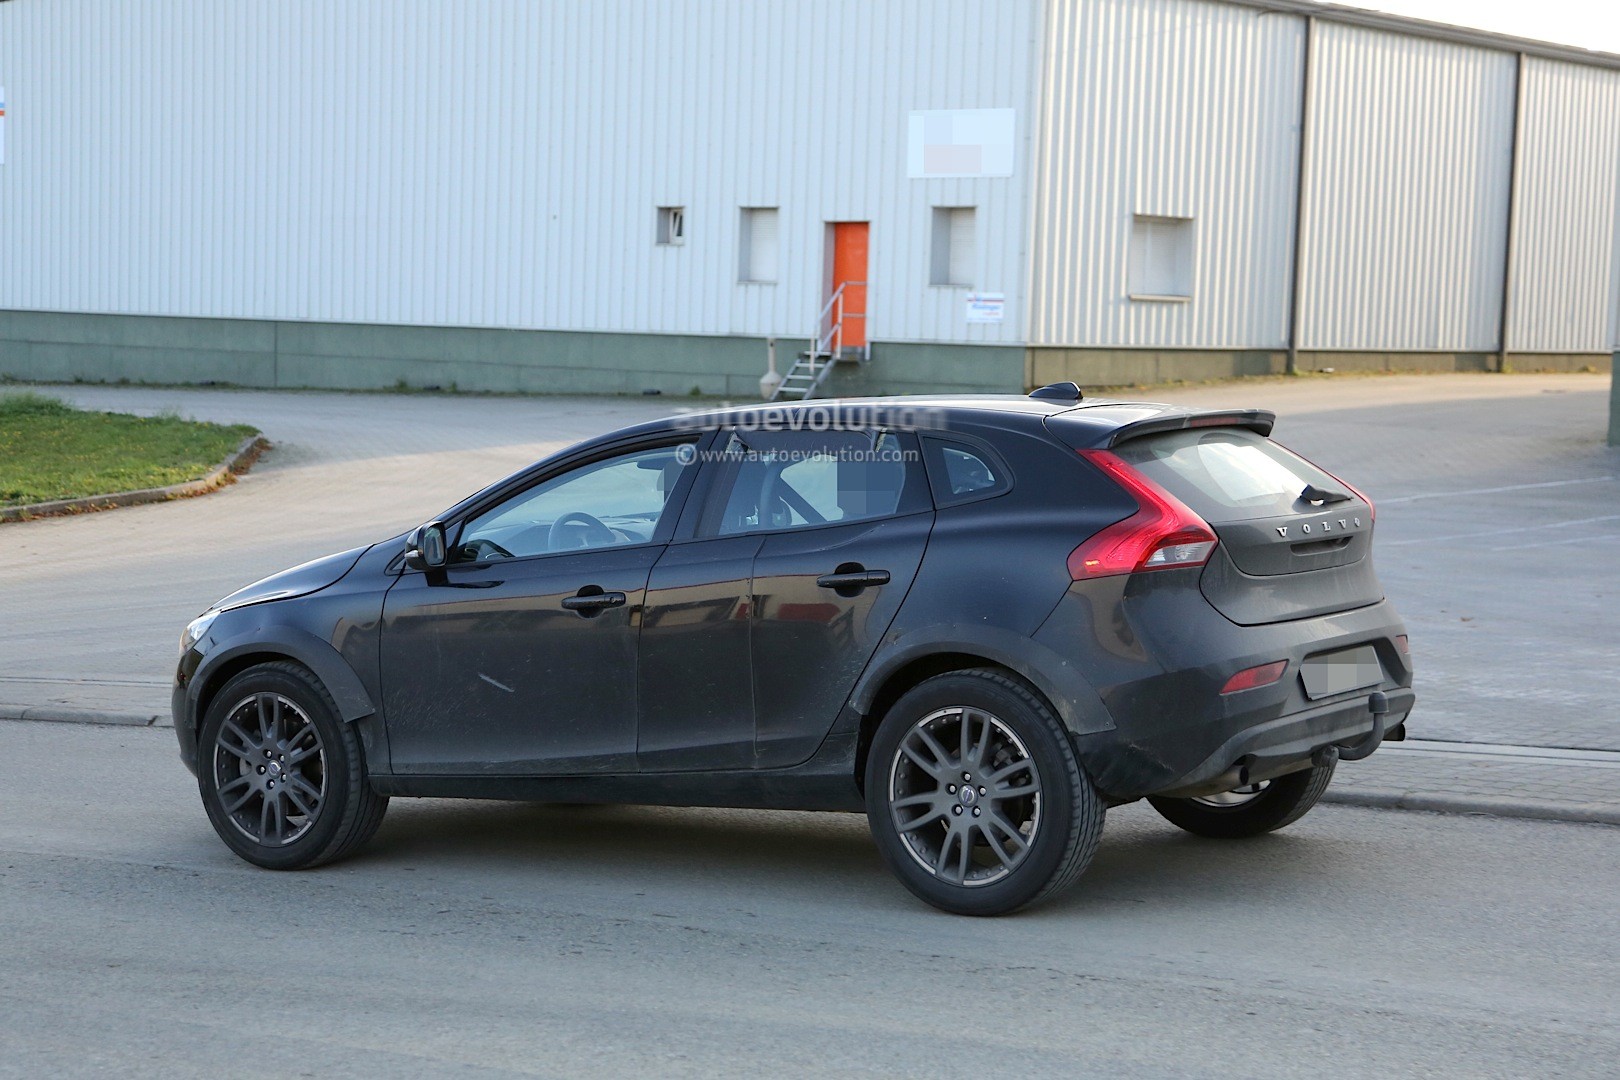 Spyshots Volvo XC40 Coming in 2018, Will Be Built in